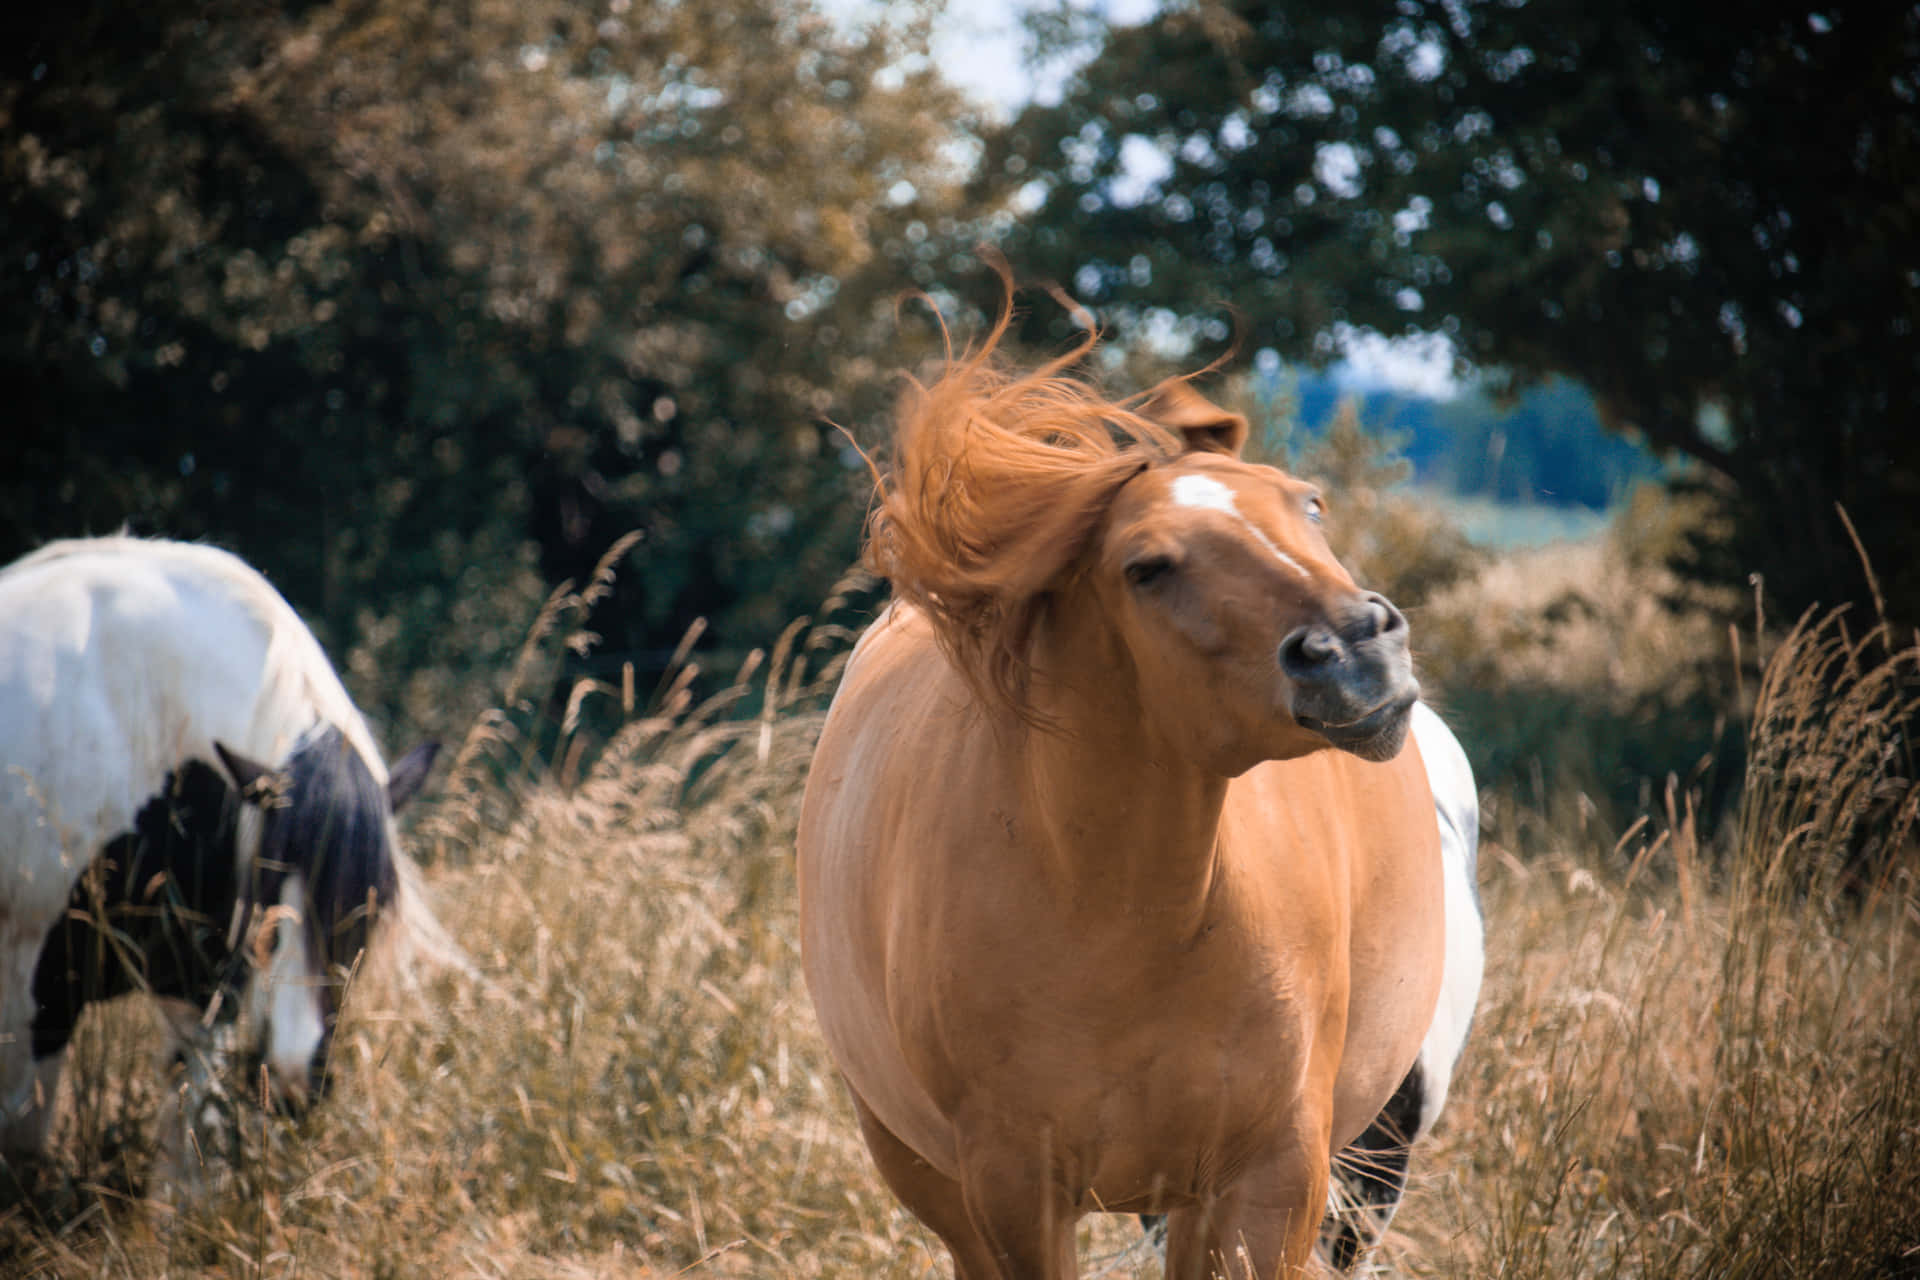 Two beautiful horses is a sight to behold